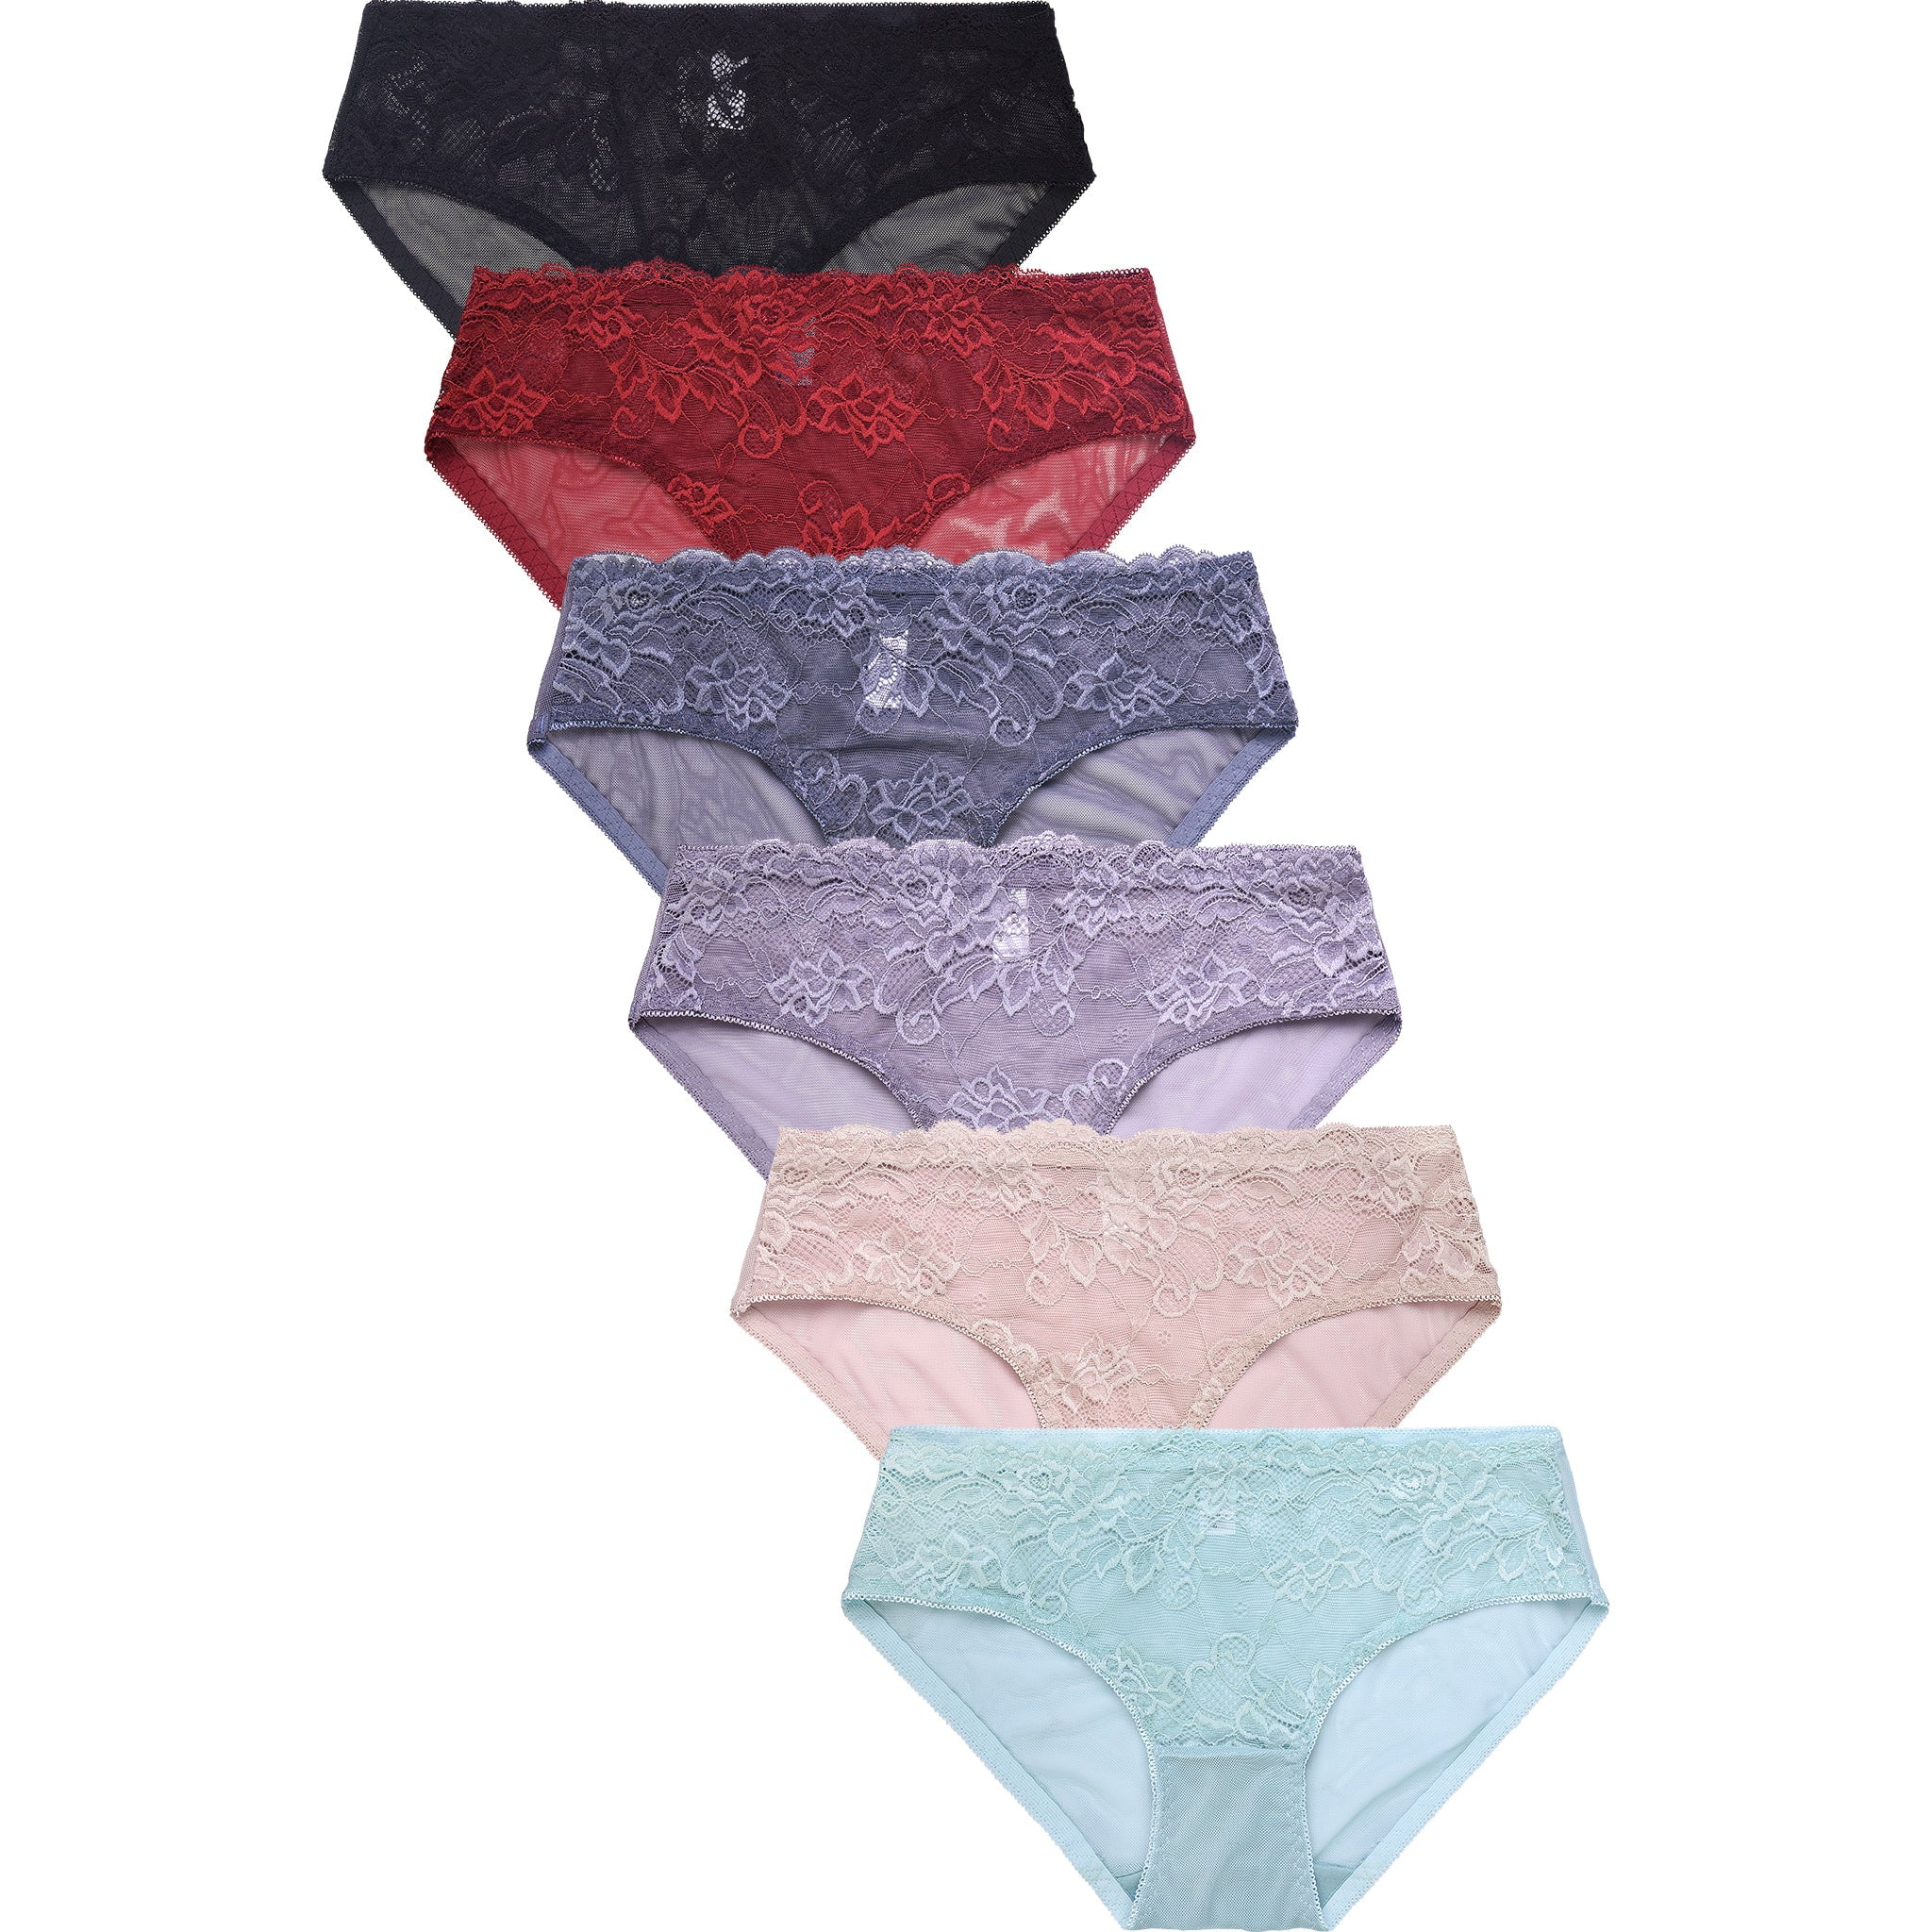 247 Frenzy Women's Essentials PACK OF 6 Allover Lace Bikini Panty